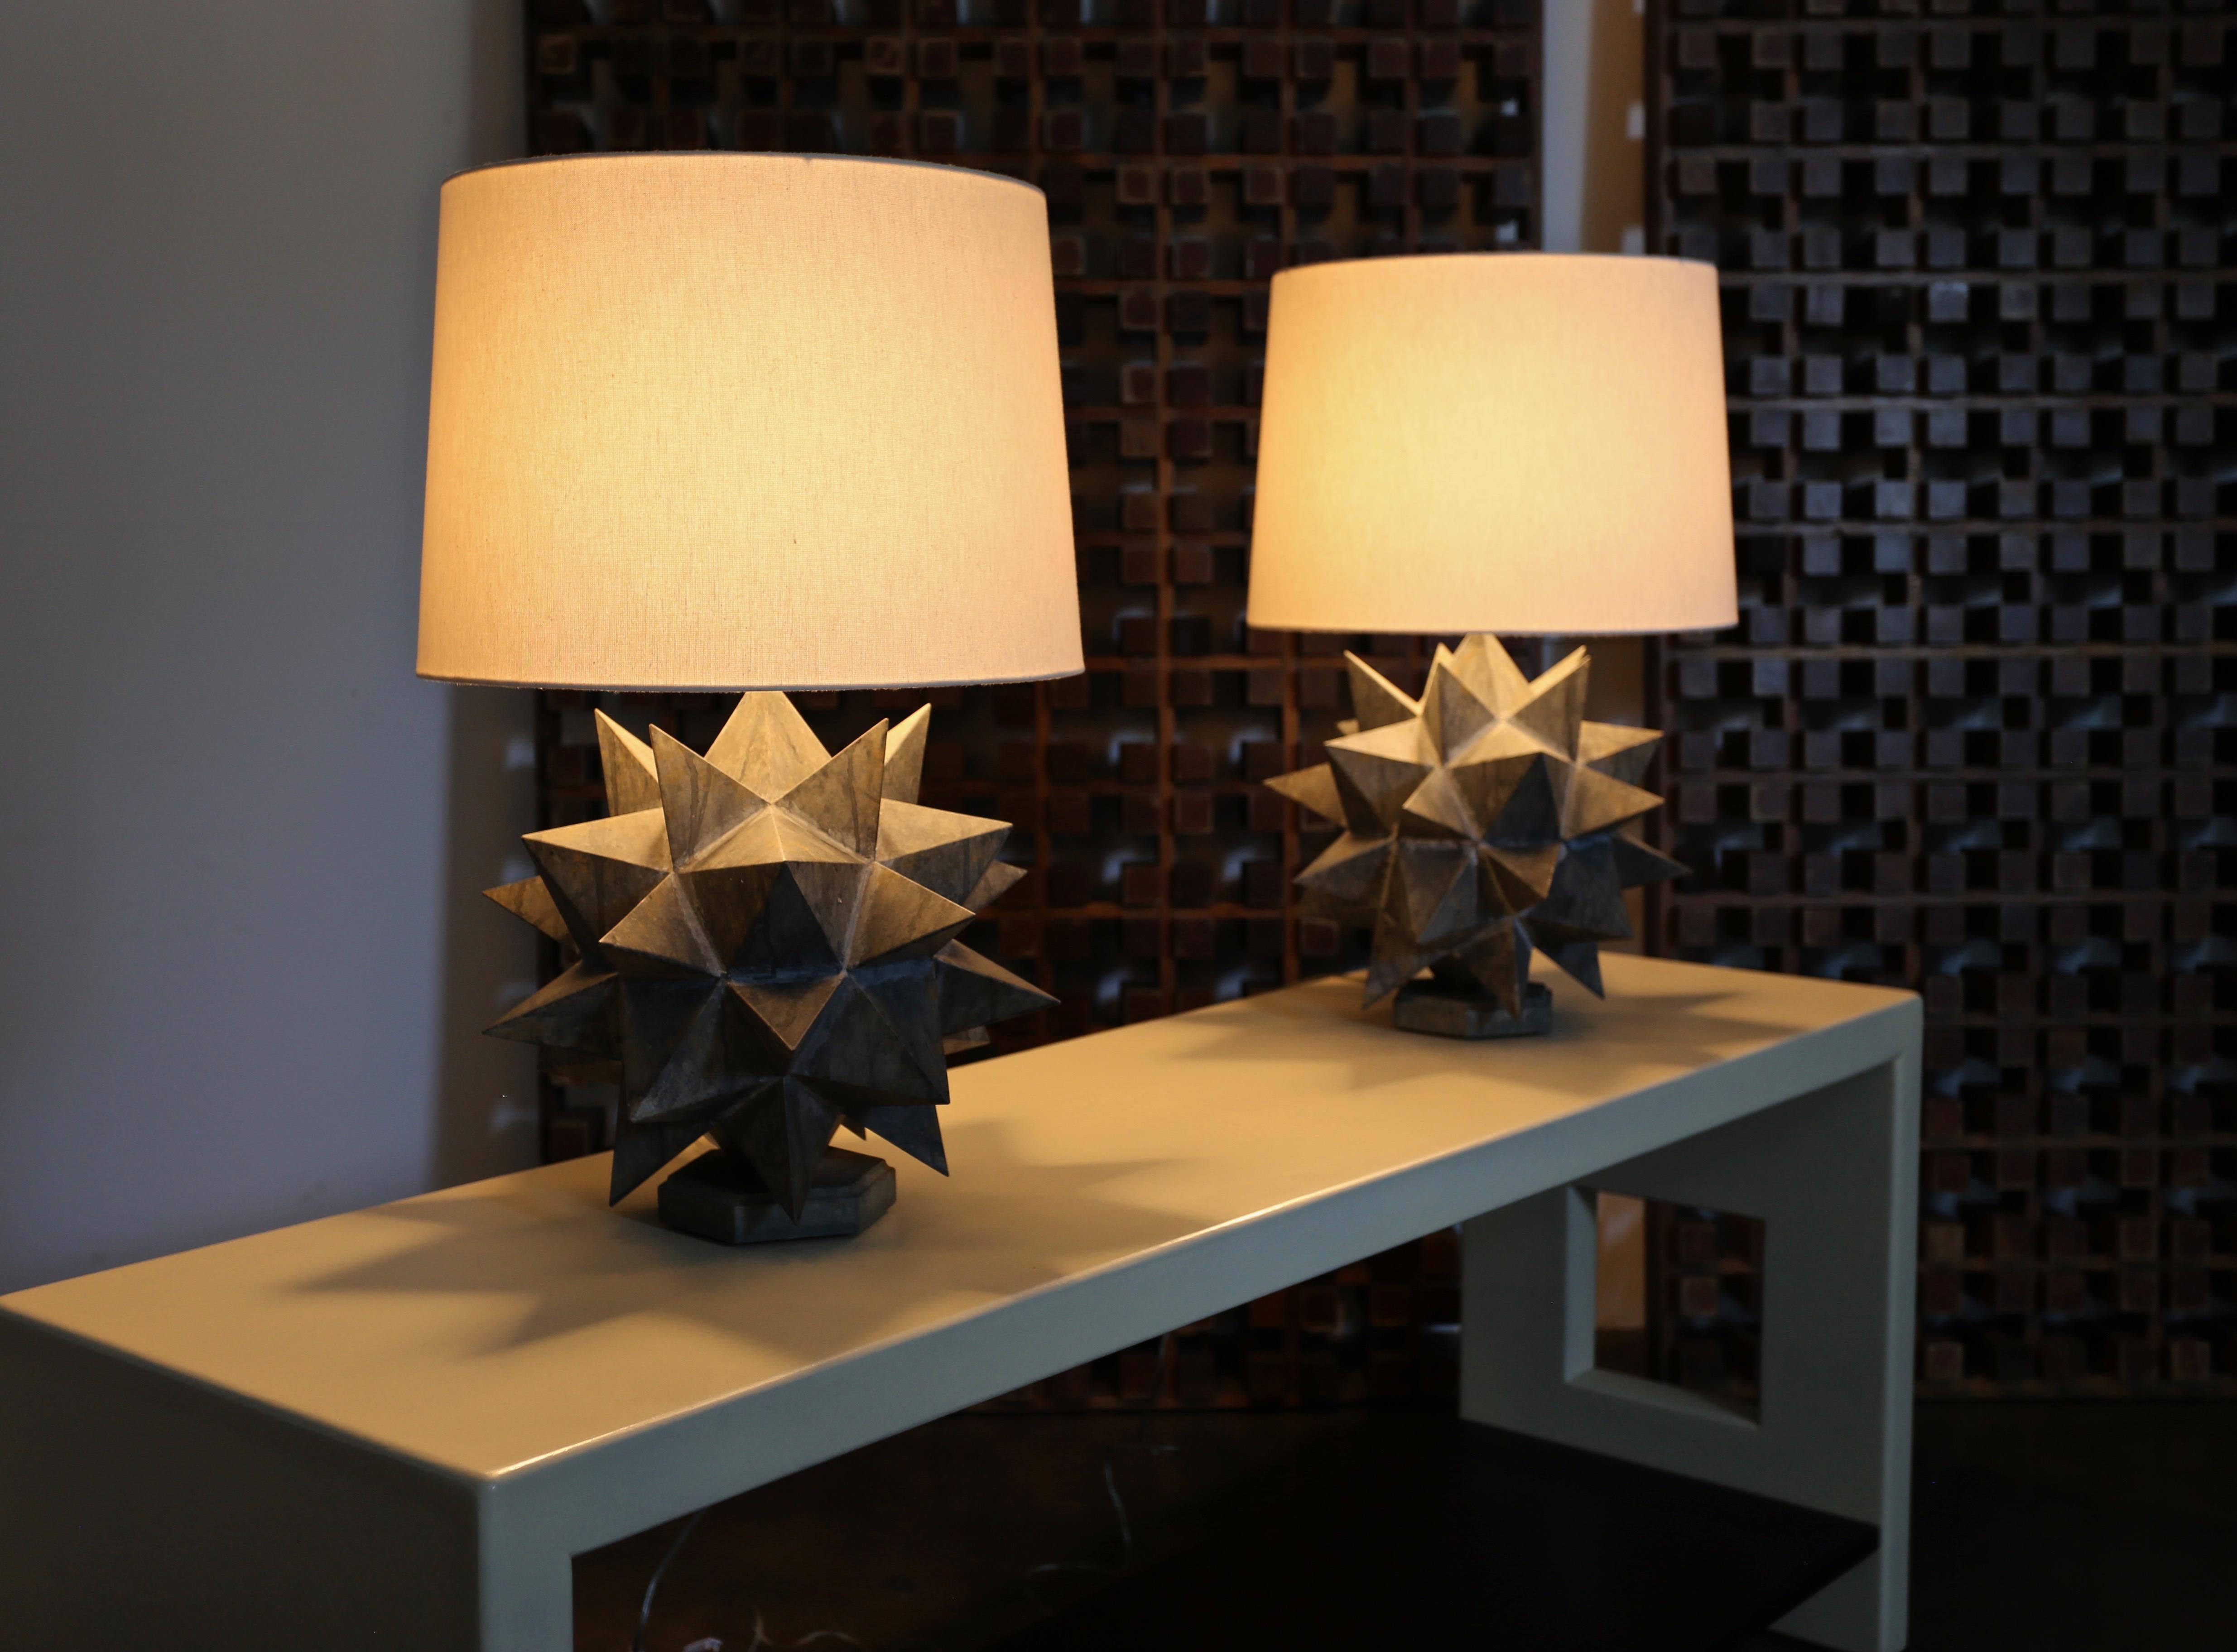 Pair of hand built sculptural table lamps, circa 1965.

Thin gauge welded metal construction.

Listed measurements include the shade.